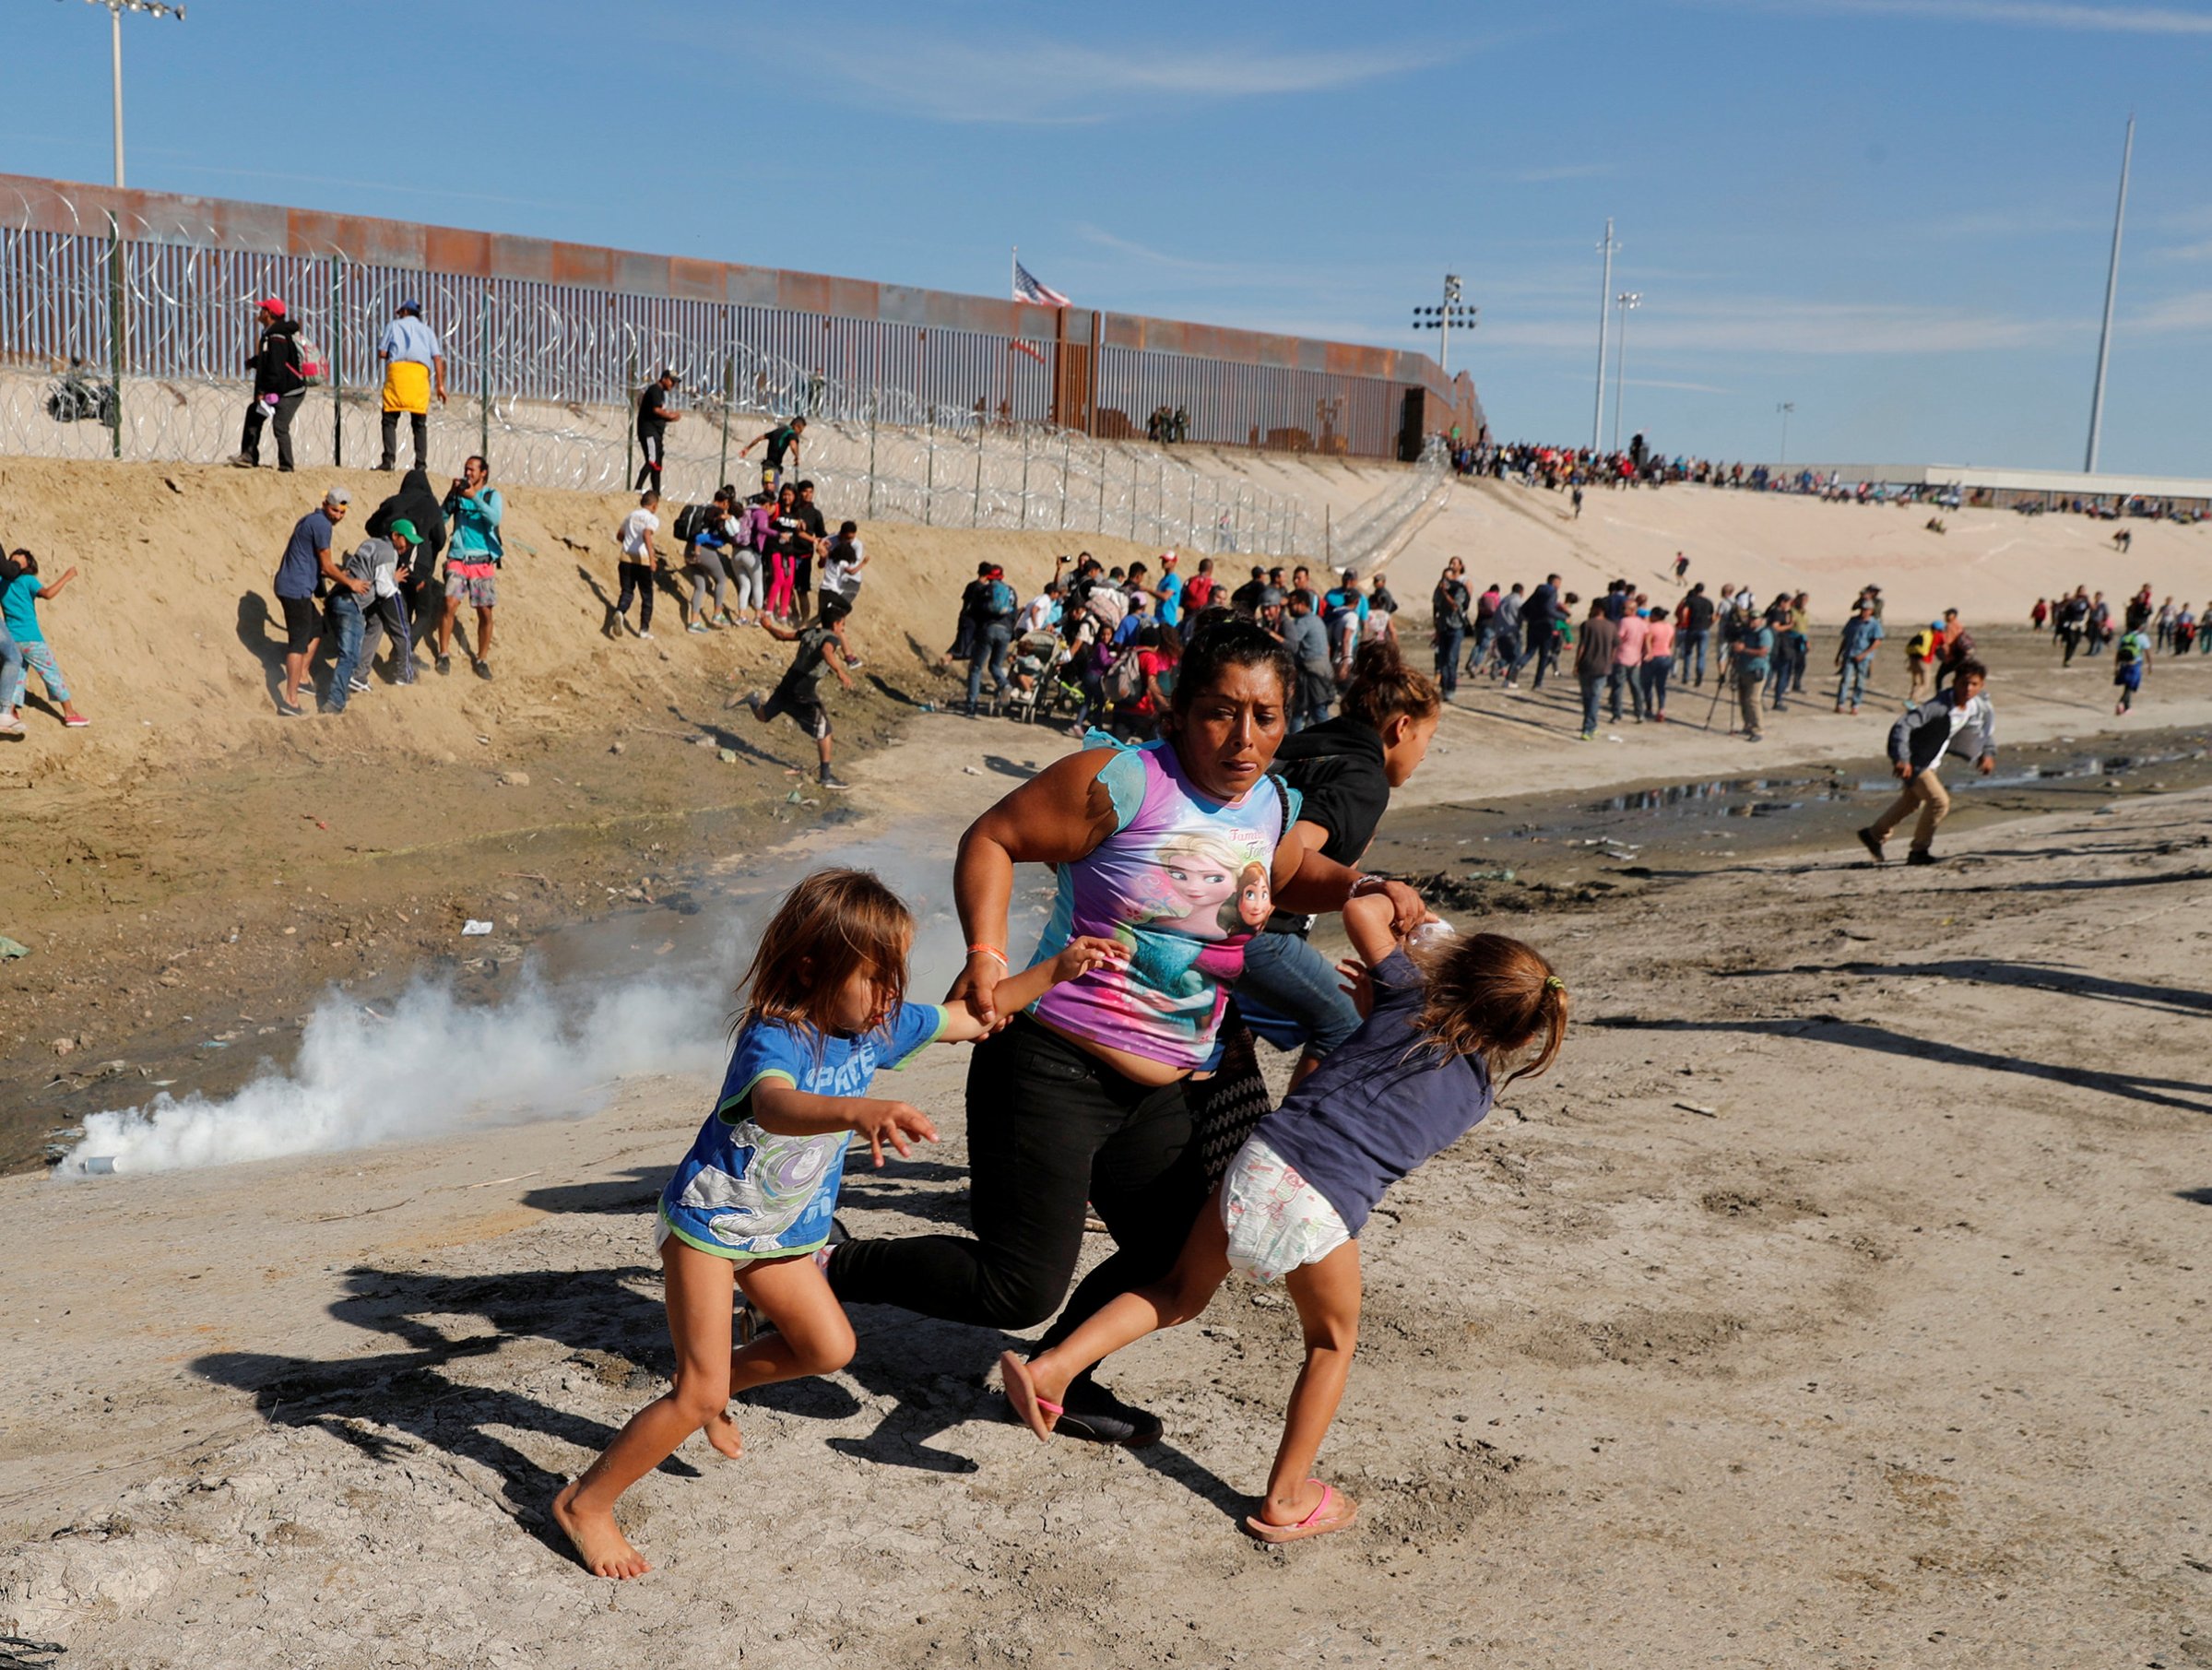 A migrant family, part of a caravan of thousands traveling from Central America to the United States, run away from tear gas